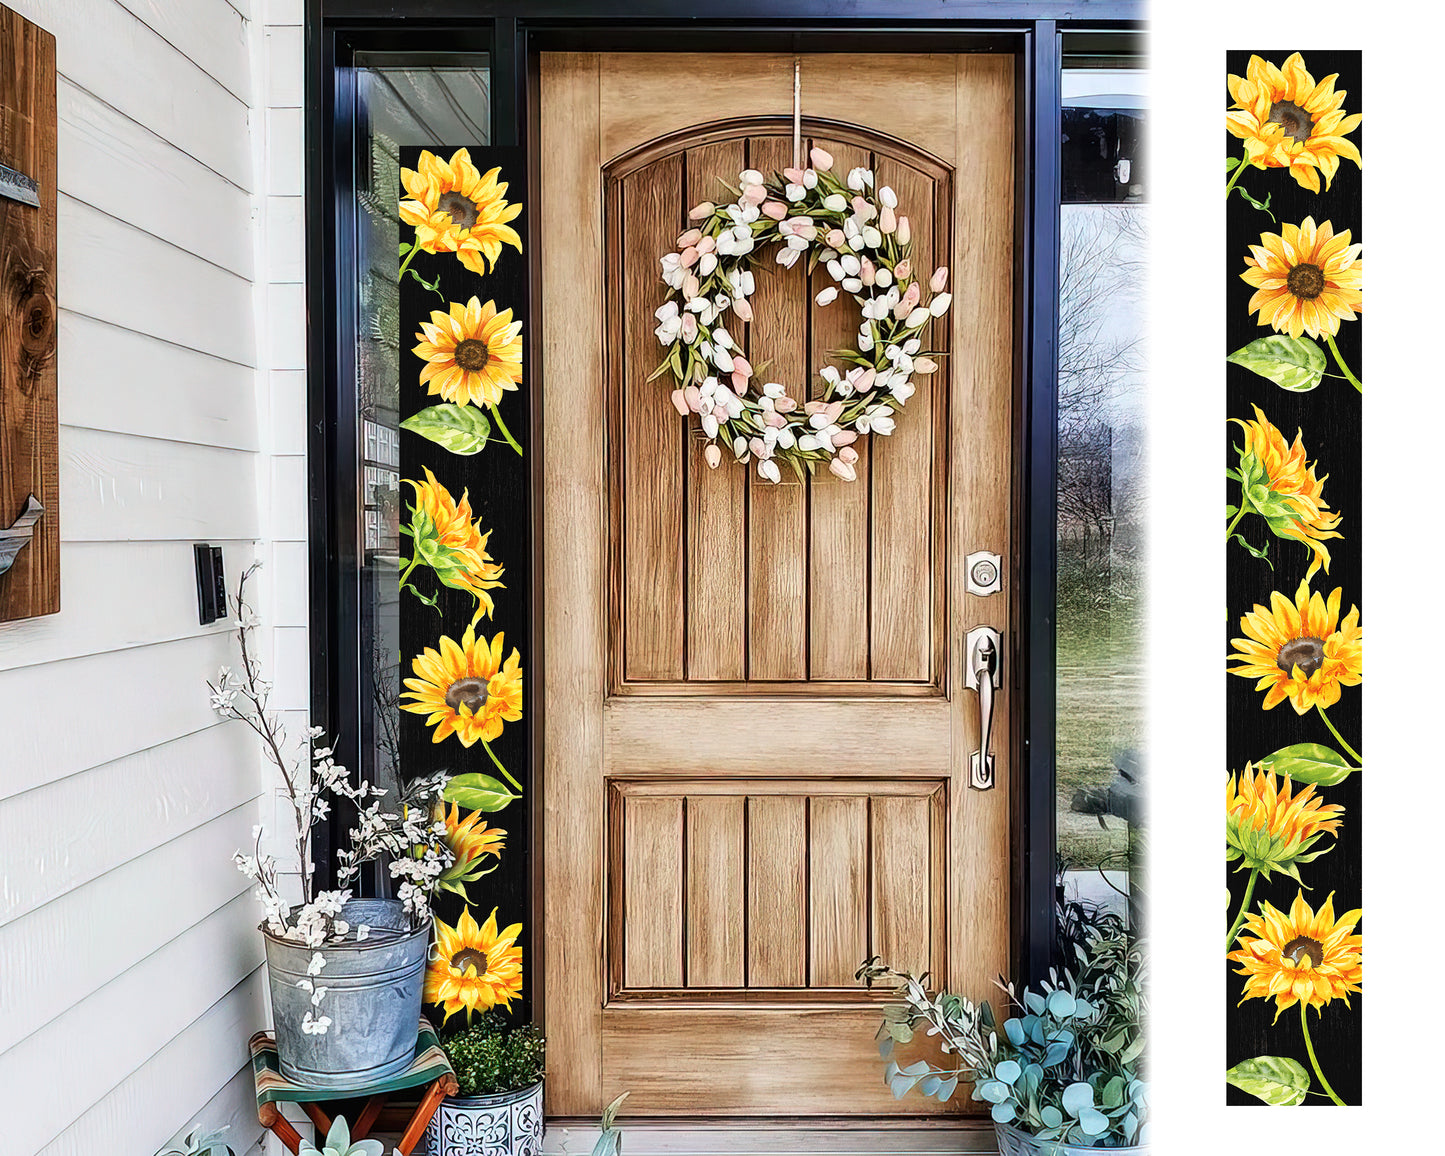 72in Sunflower Porch Sign, Charming Wooden Welcome Decor for Front Door, Rustic Black Garden Wall Art, Seasonal Home Decoration